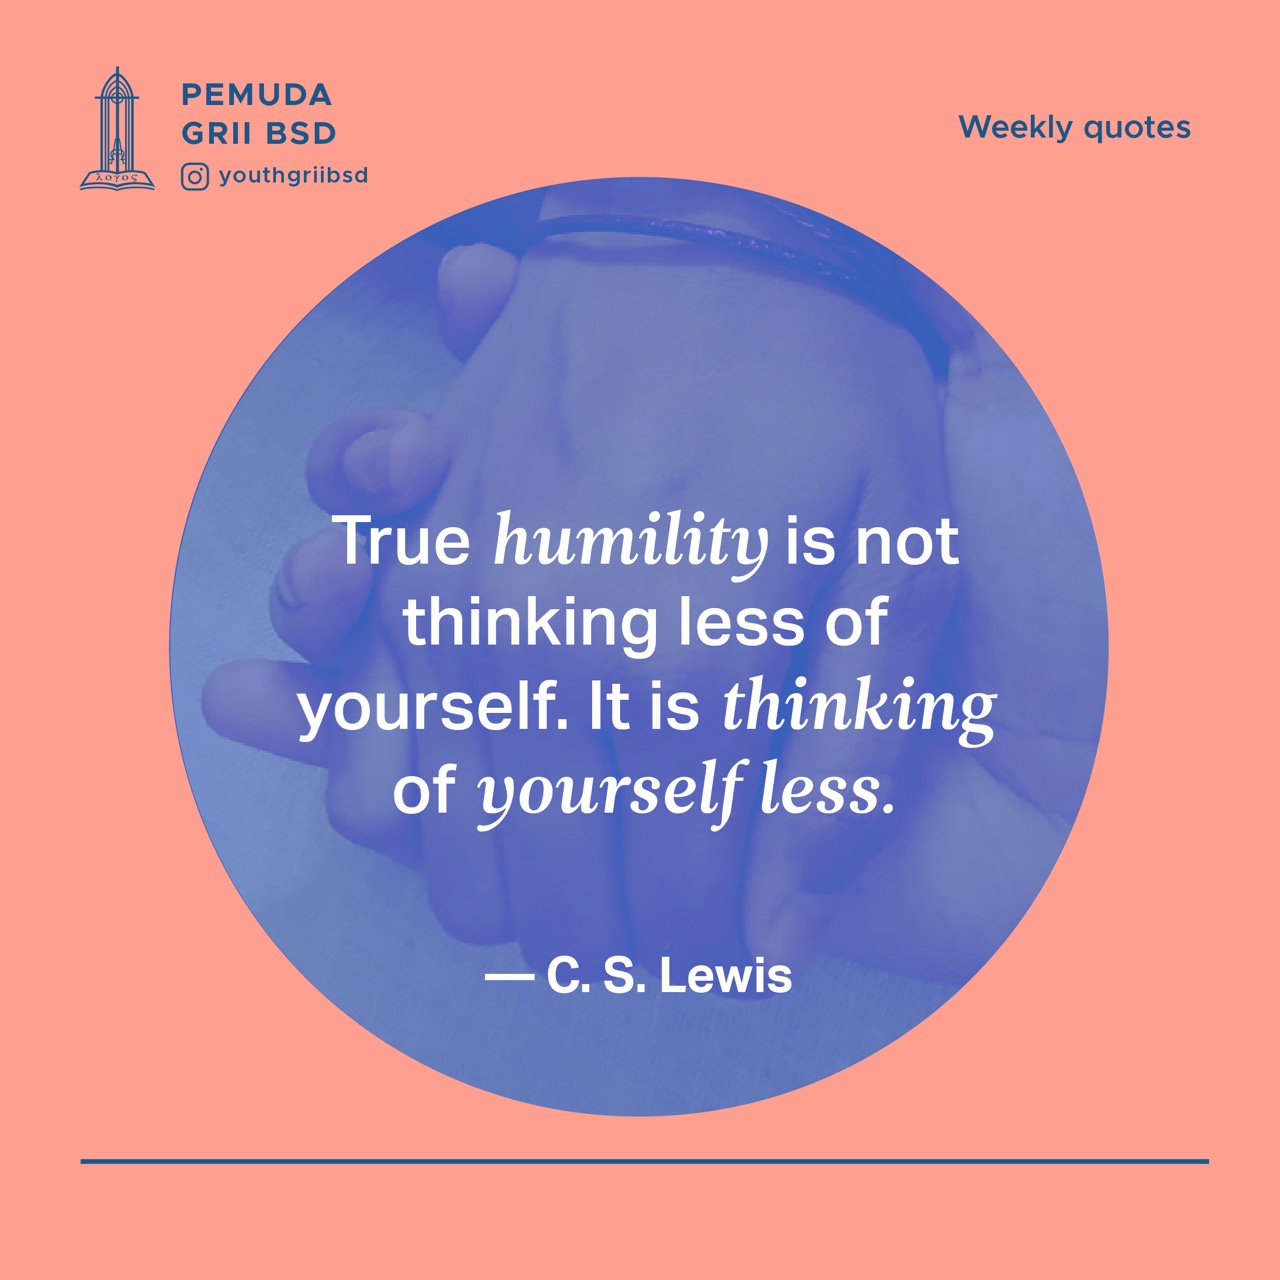 True humility is not thinking less of yourself. It is thinking of yourself less.